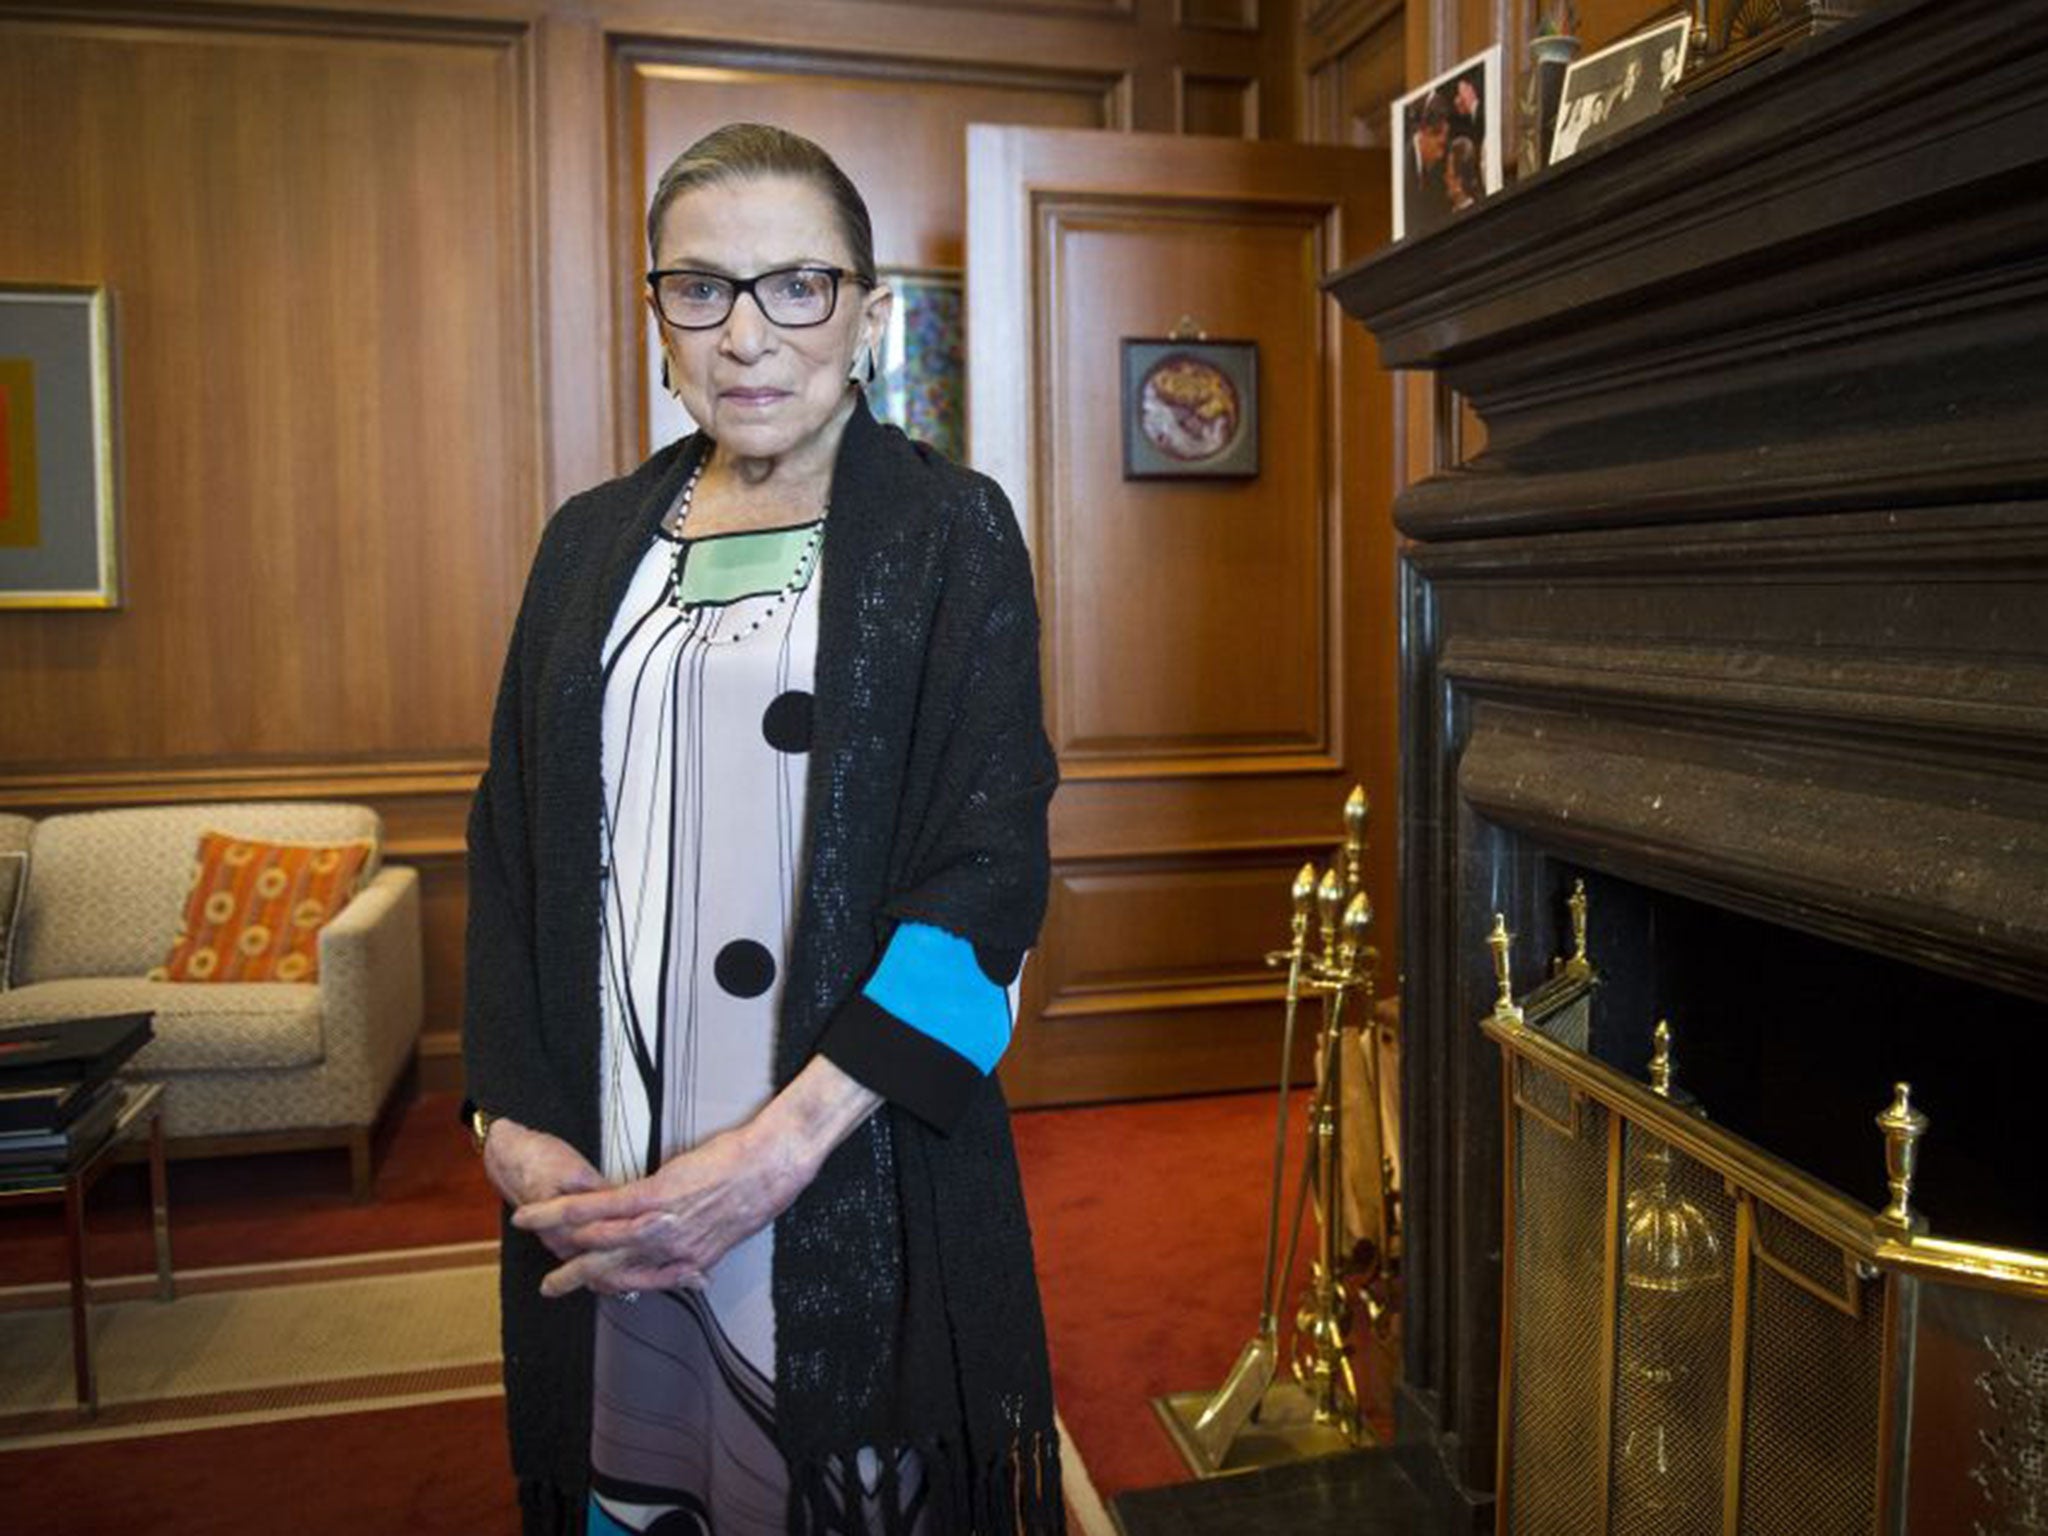 Supreme Court Justice Ruth Bader Ginsburg was an ardent supporter of women’s rights